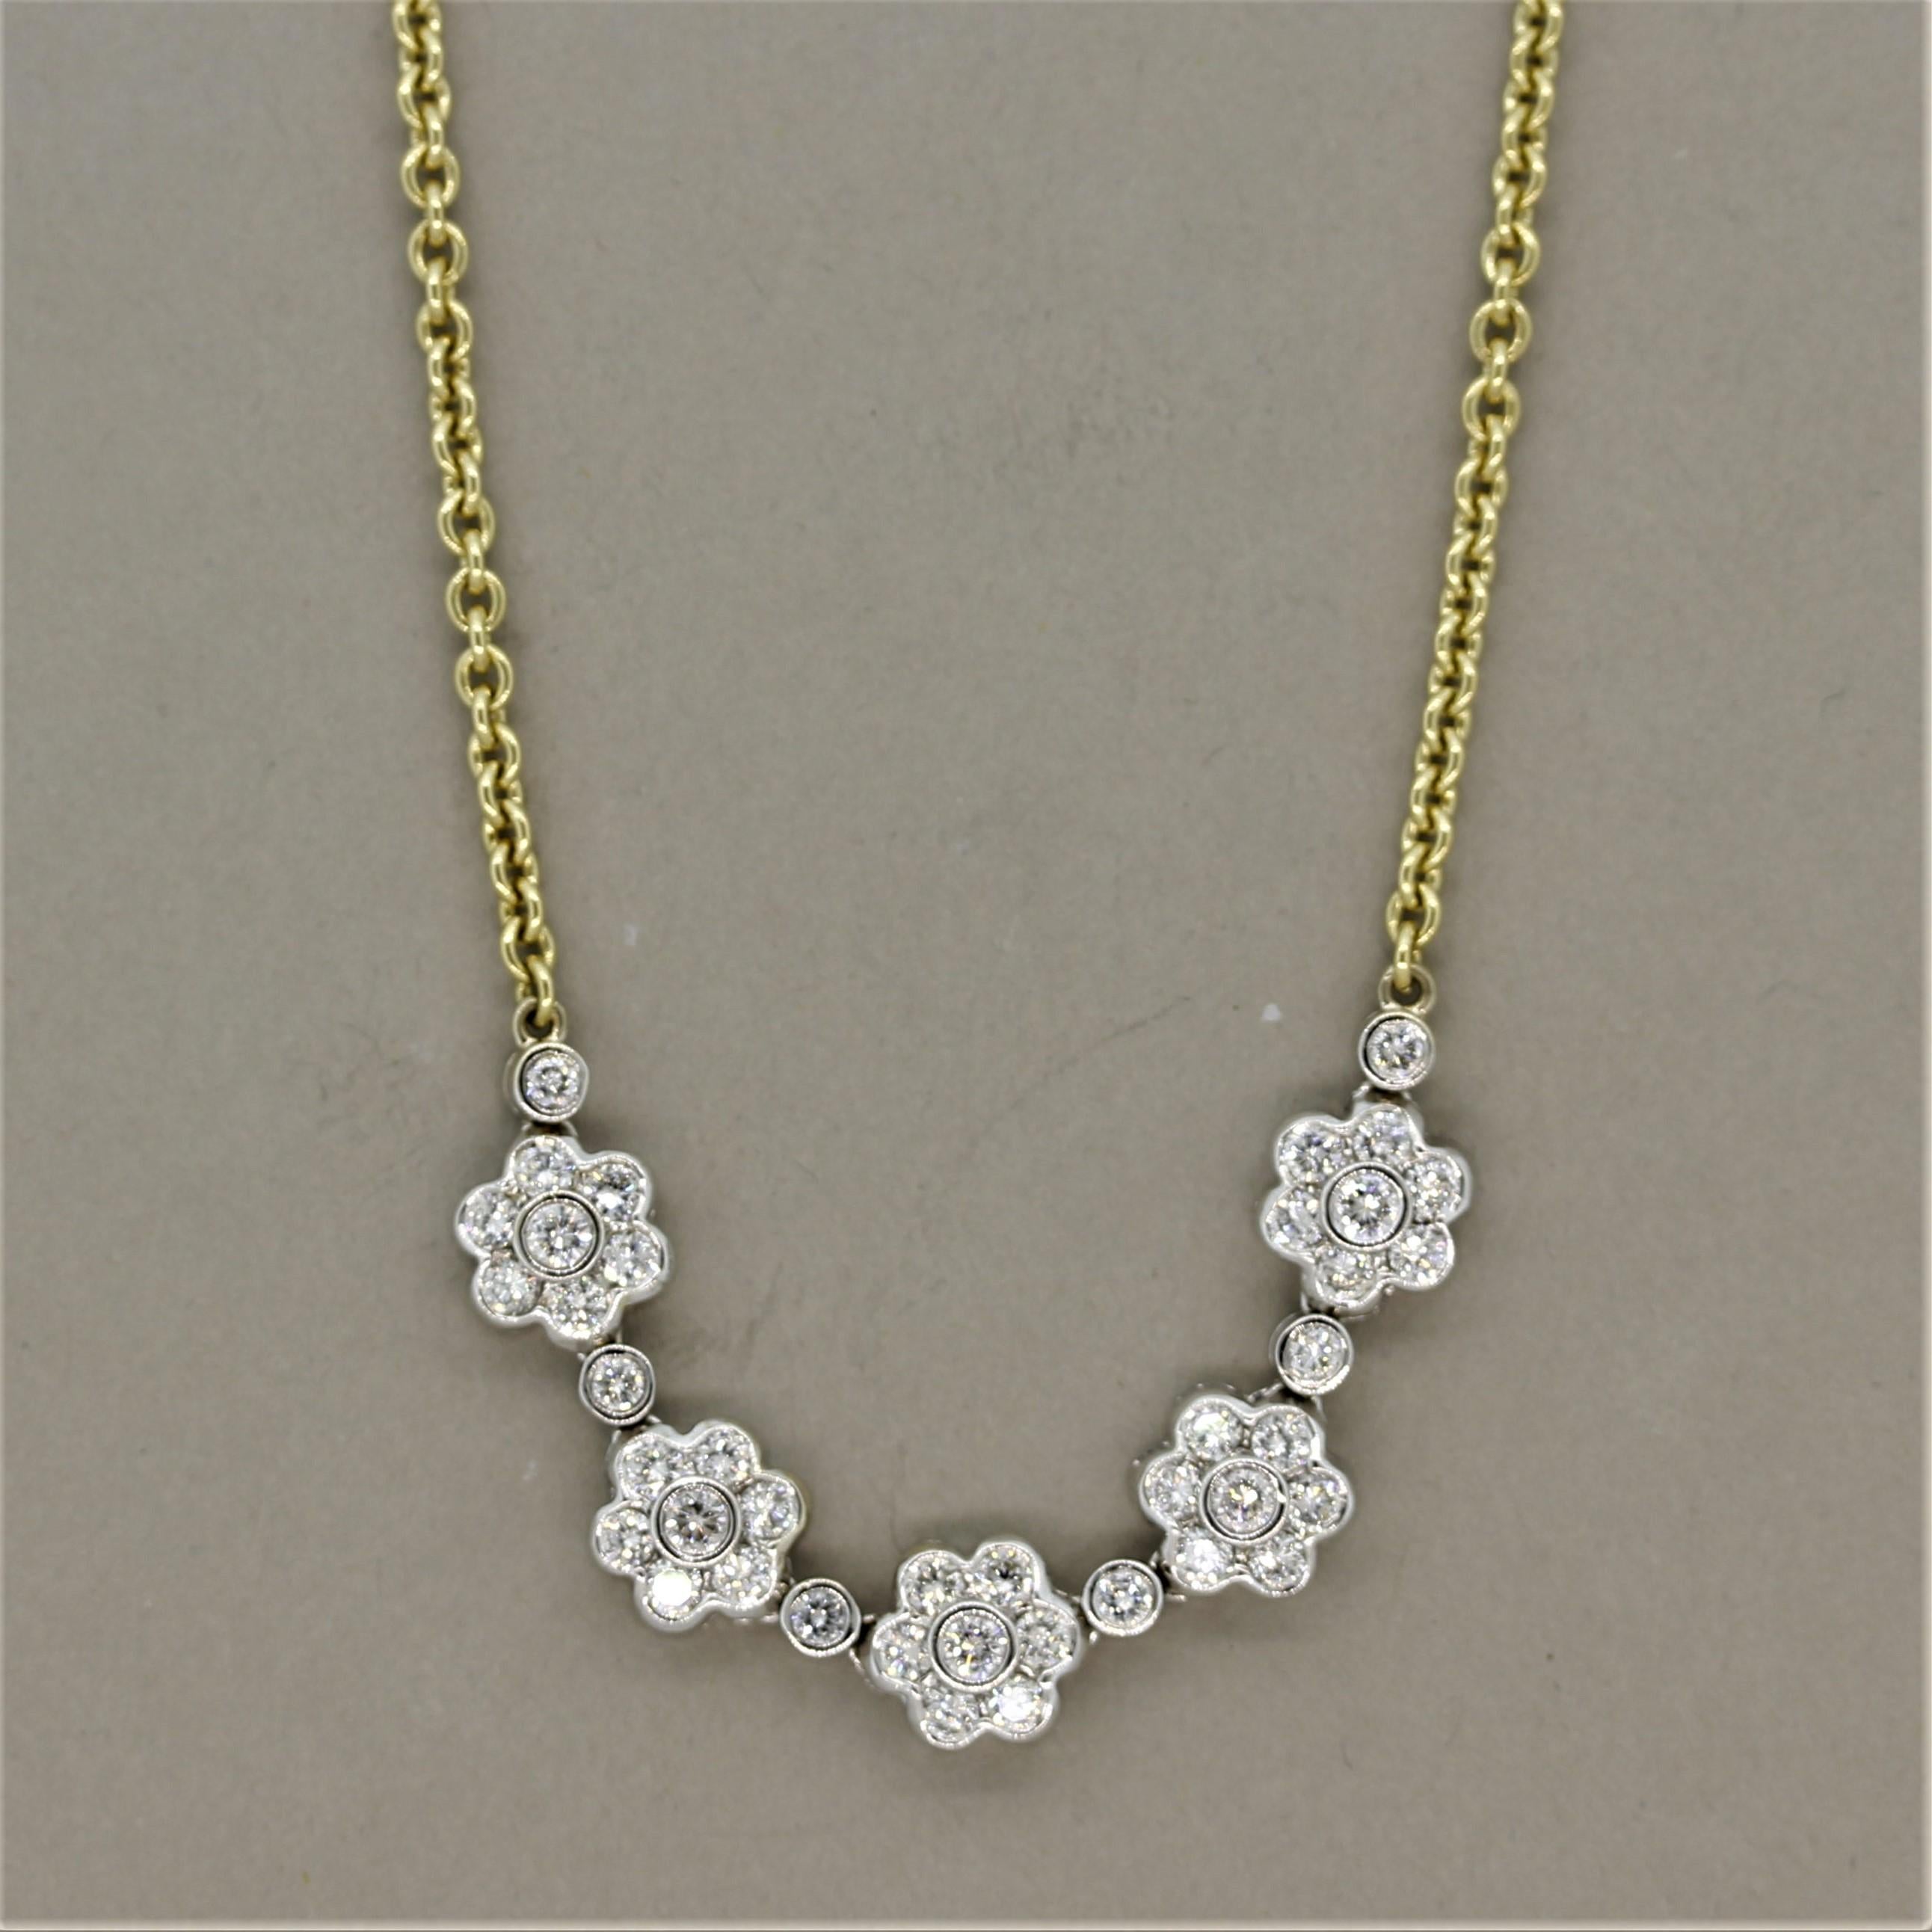 A sweet and stylish necklace made in 18k gold. It features 1.39 carats of round brilliant cut diamonds which are bezel set in a floral pattern creating 5 flowers. The flowers are made in white gold while the rest of the necklace is made in yellow